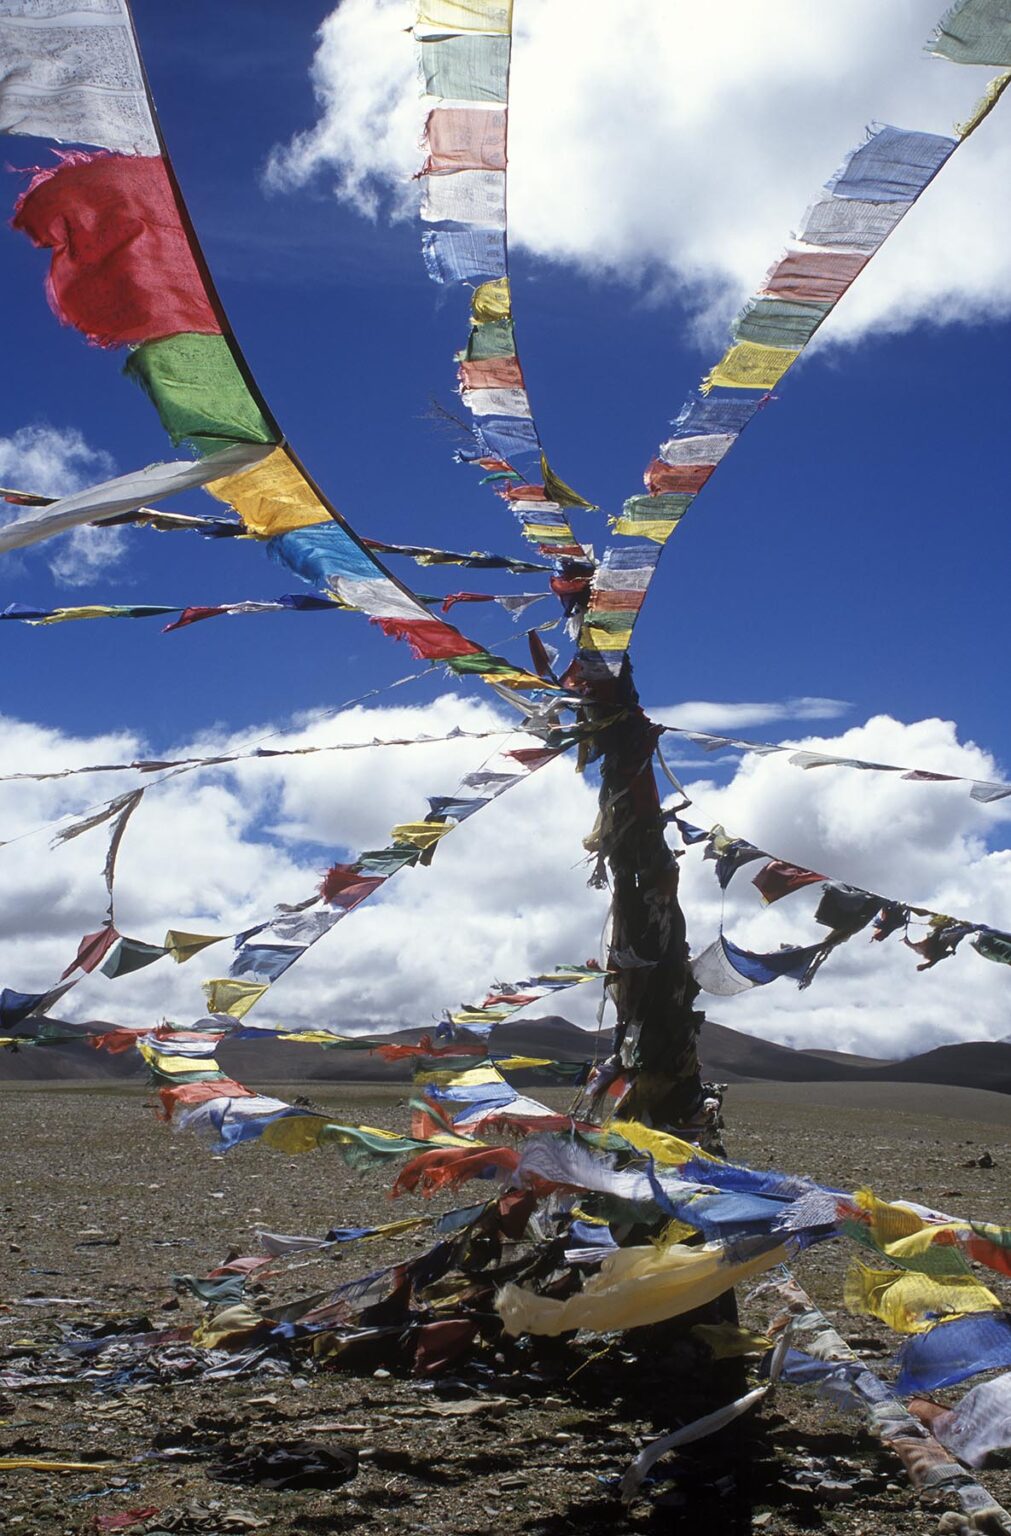 PRAYER FLAGS fly atop the LALUNG LA (PASS) at over 17,000 feet in elevation along the FRIENDSHIP HIGHWAY - TIBET